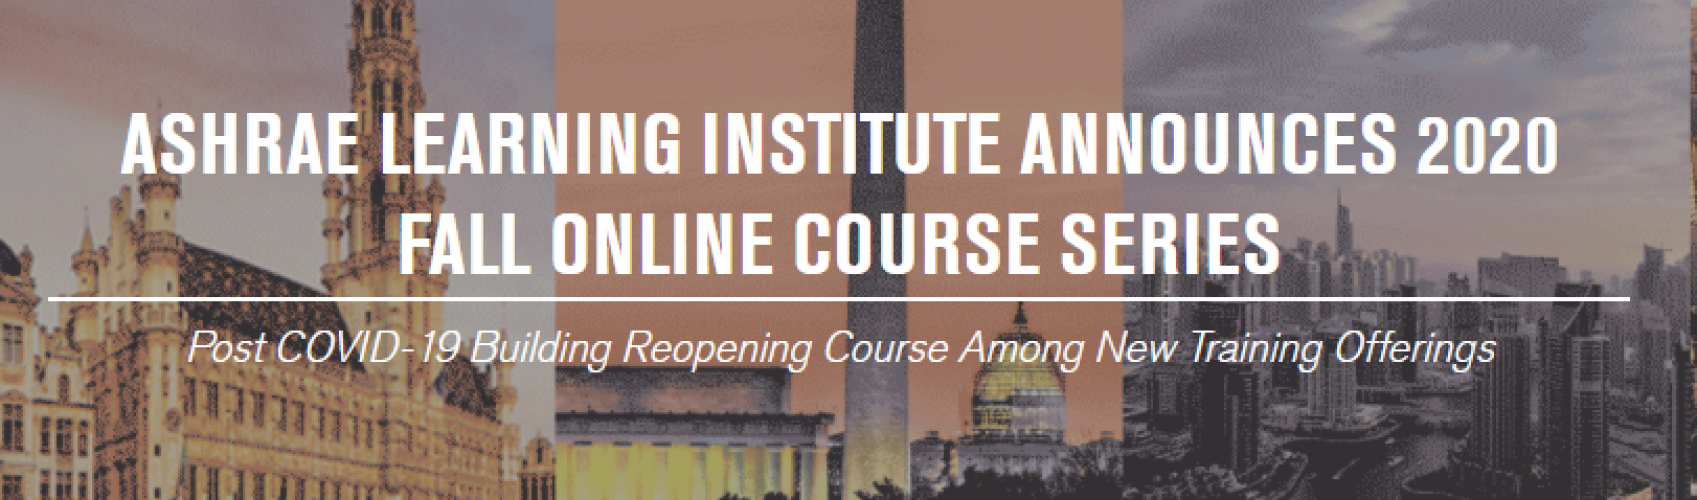 ASHRAE Learning Institute Announces 2020 Fall Online Course Series